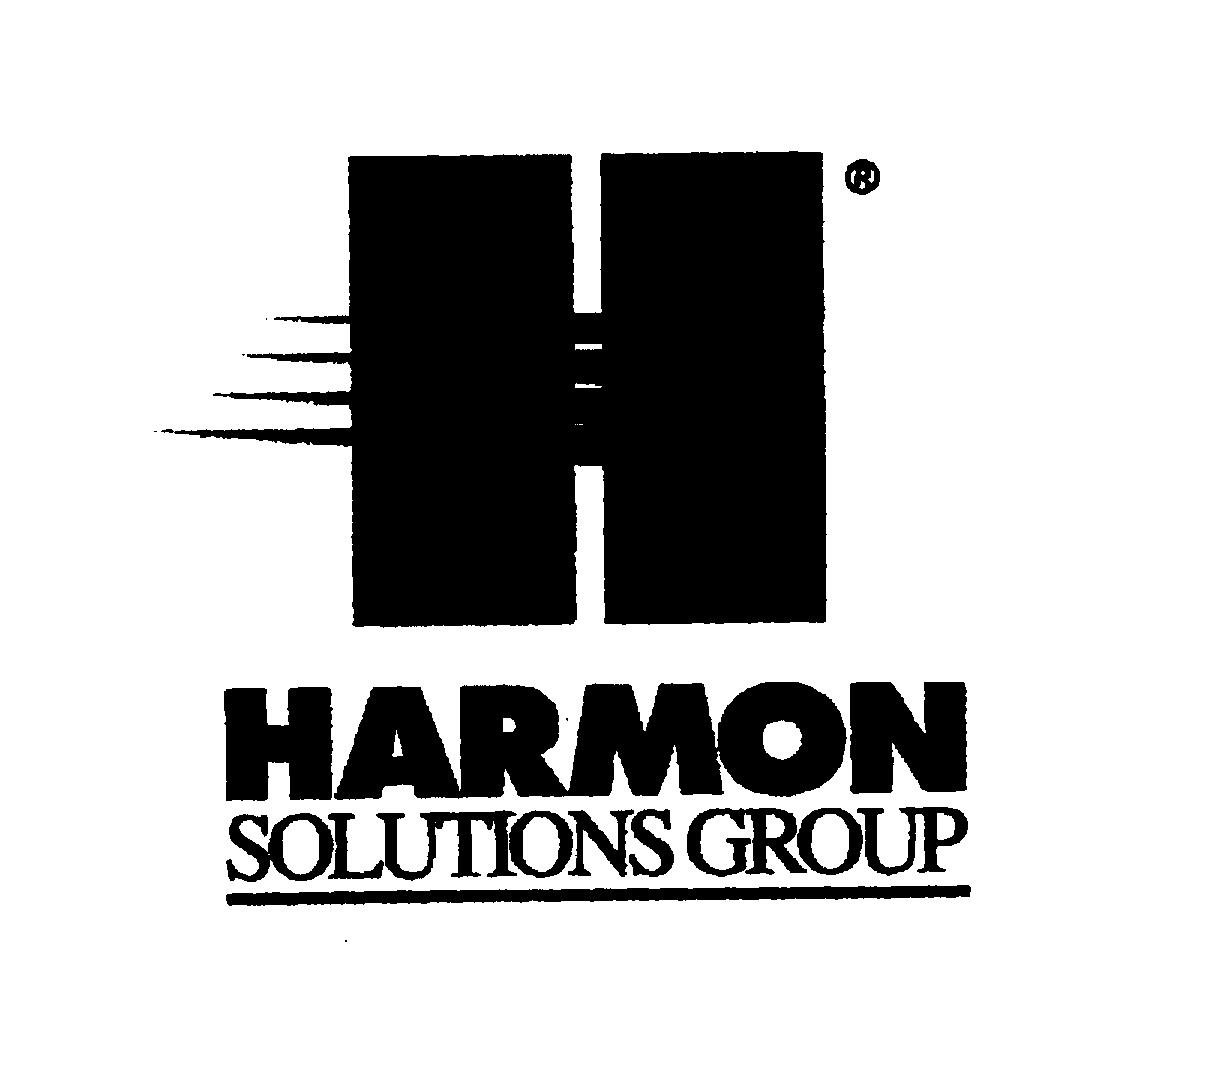  HARMON SOLUTIONS GROUP